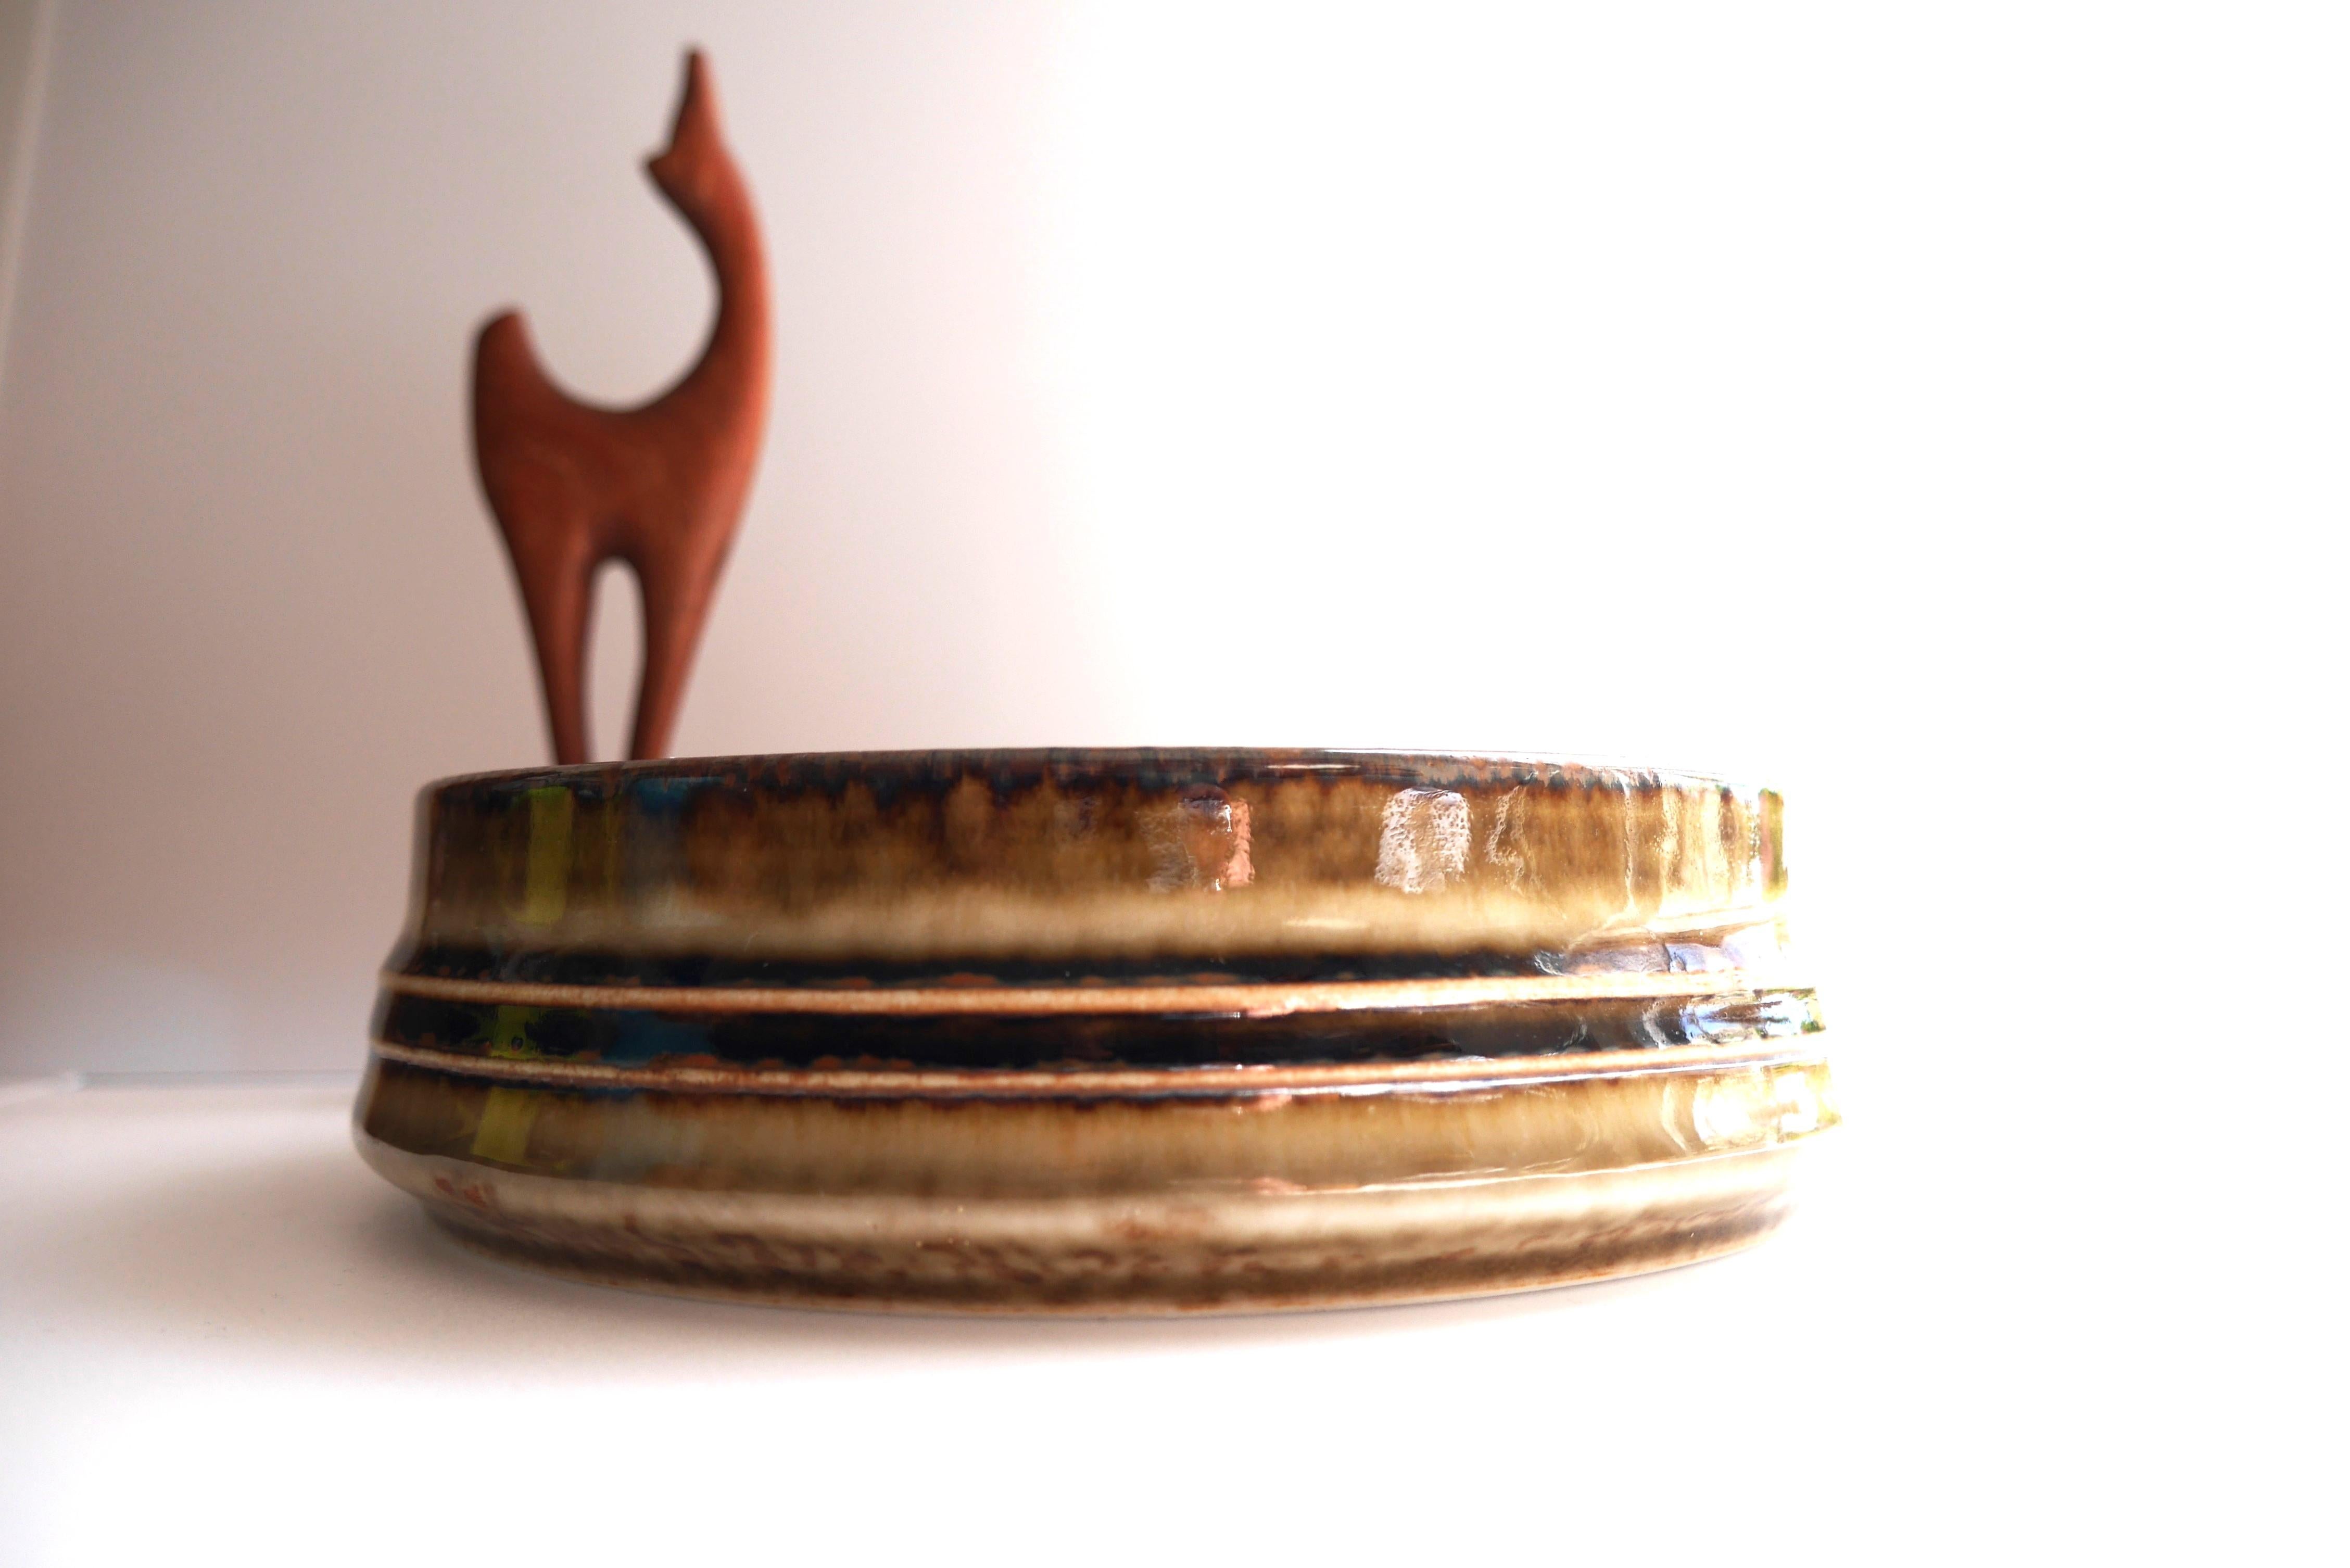 Hand-Crafted Mid-century modern pottery bowl, known as 